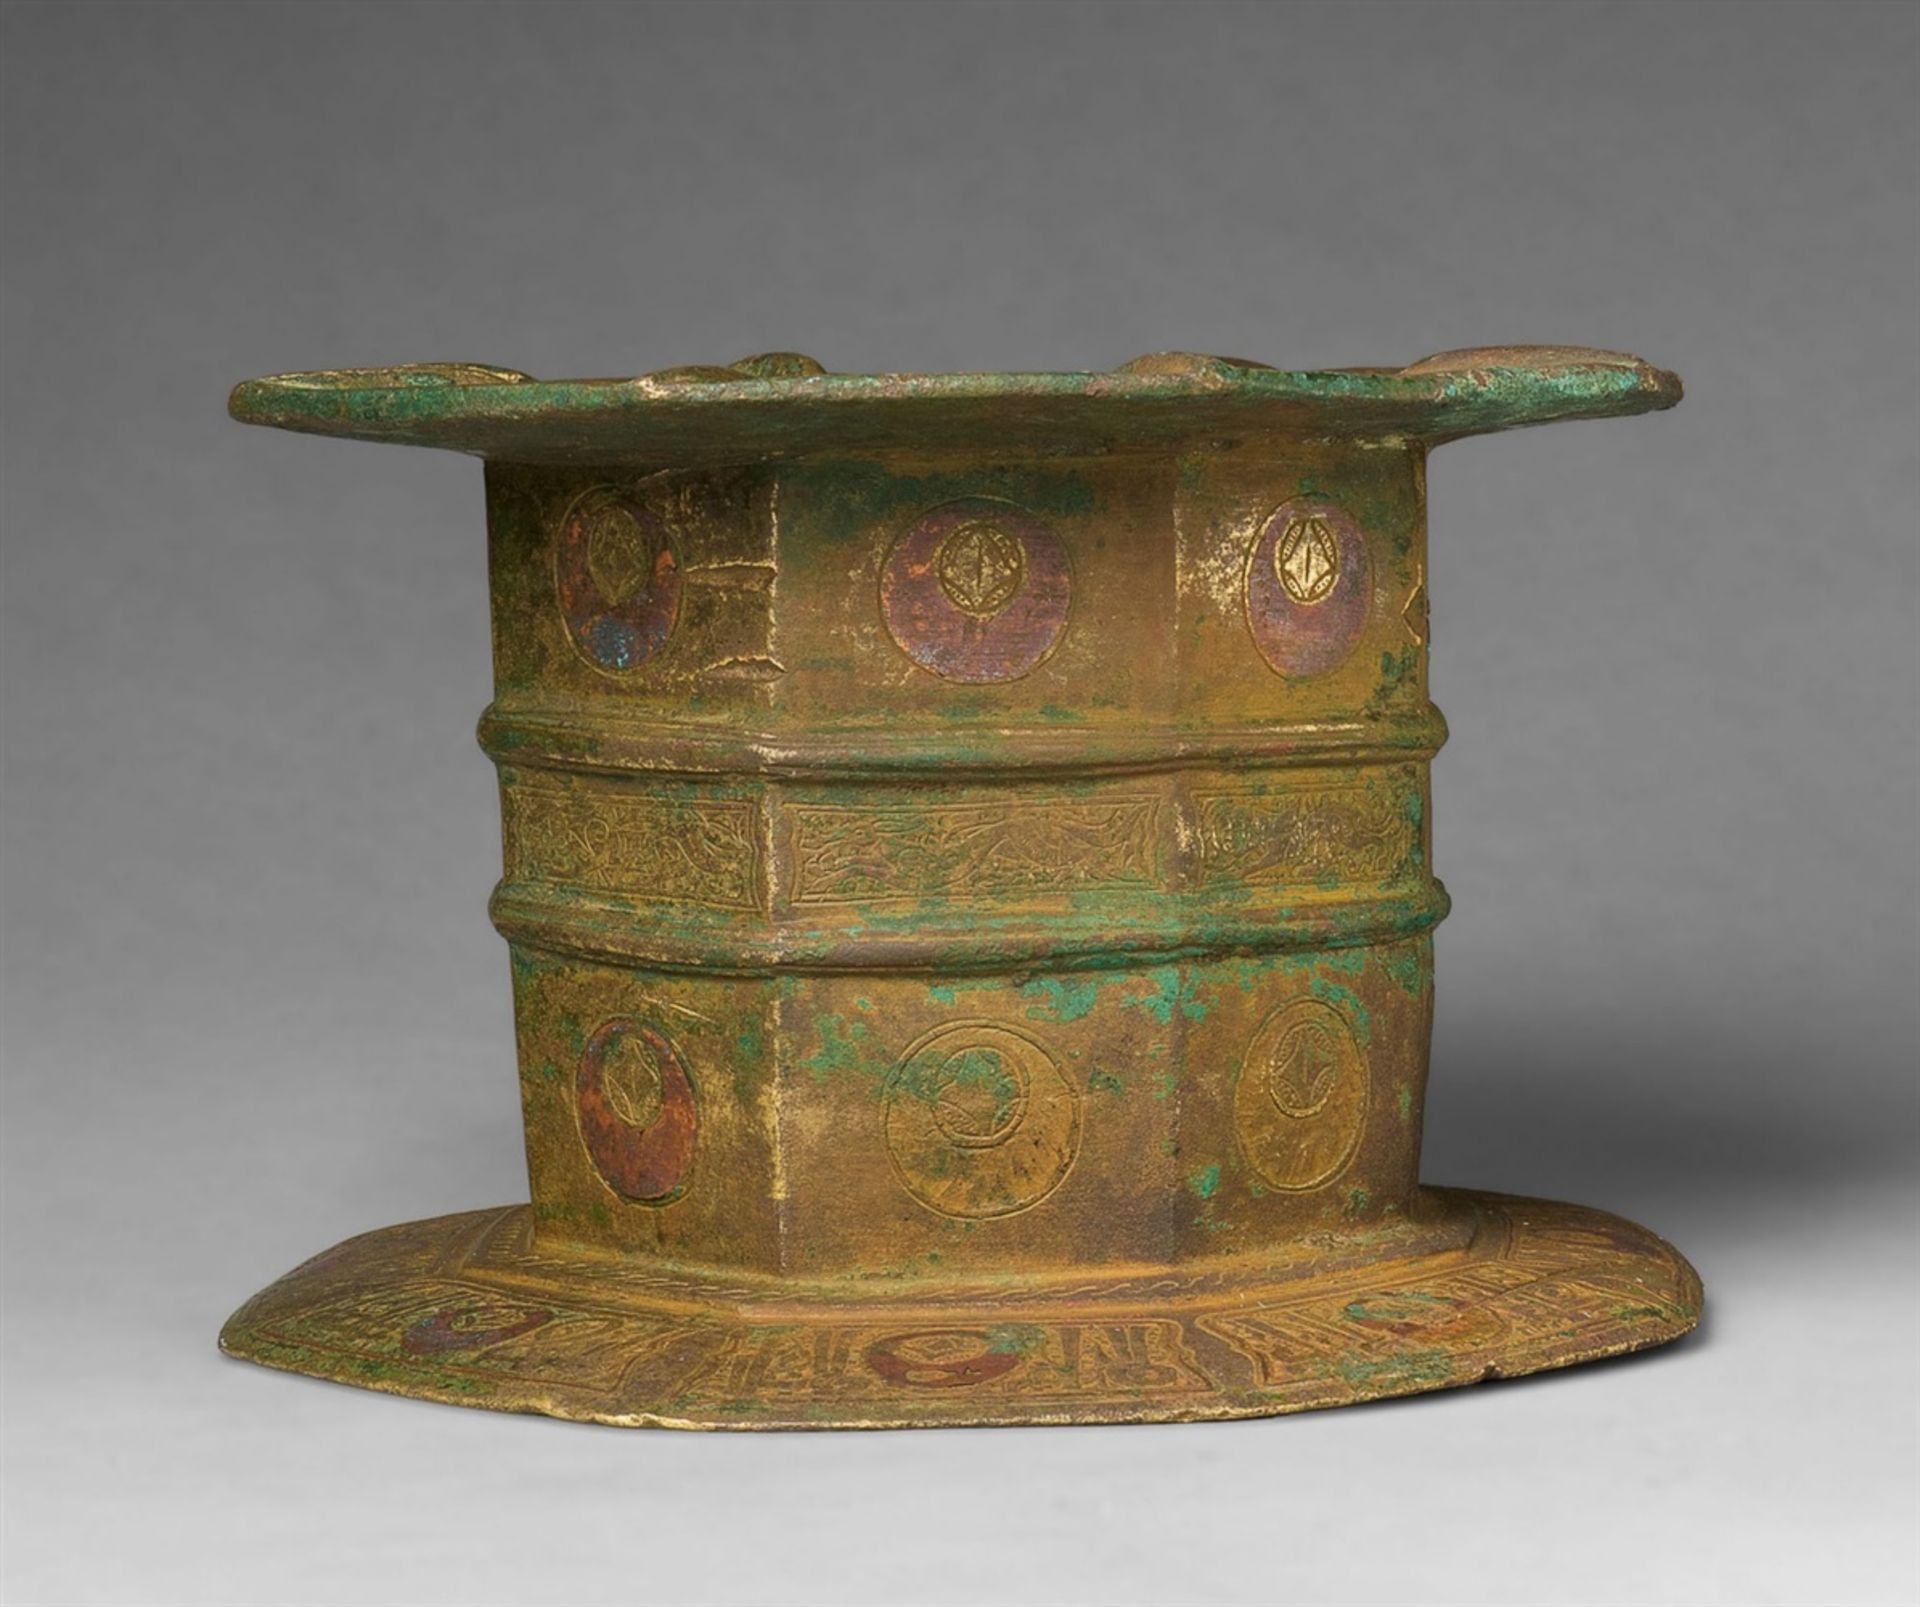 An important Islamic mortarChased cast bronze with copper damascening and gilding. Octagonal section